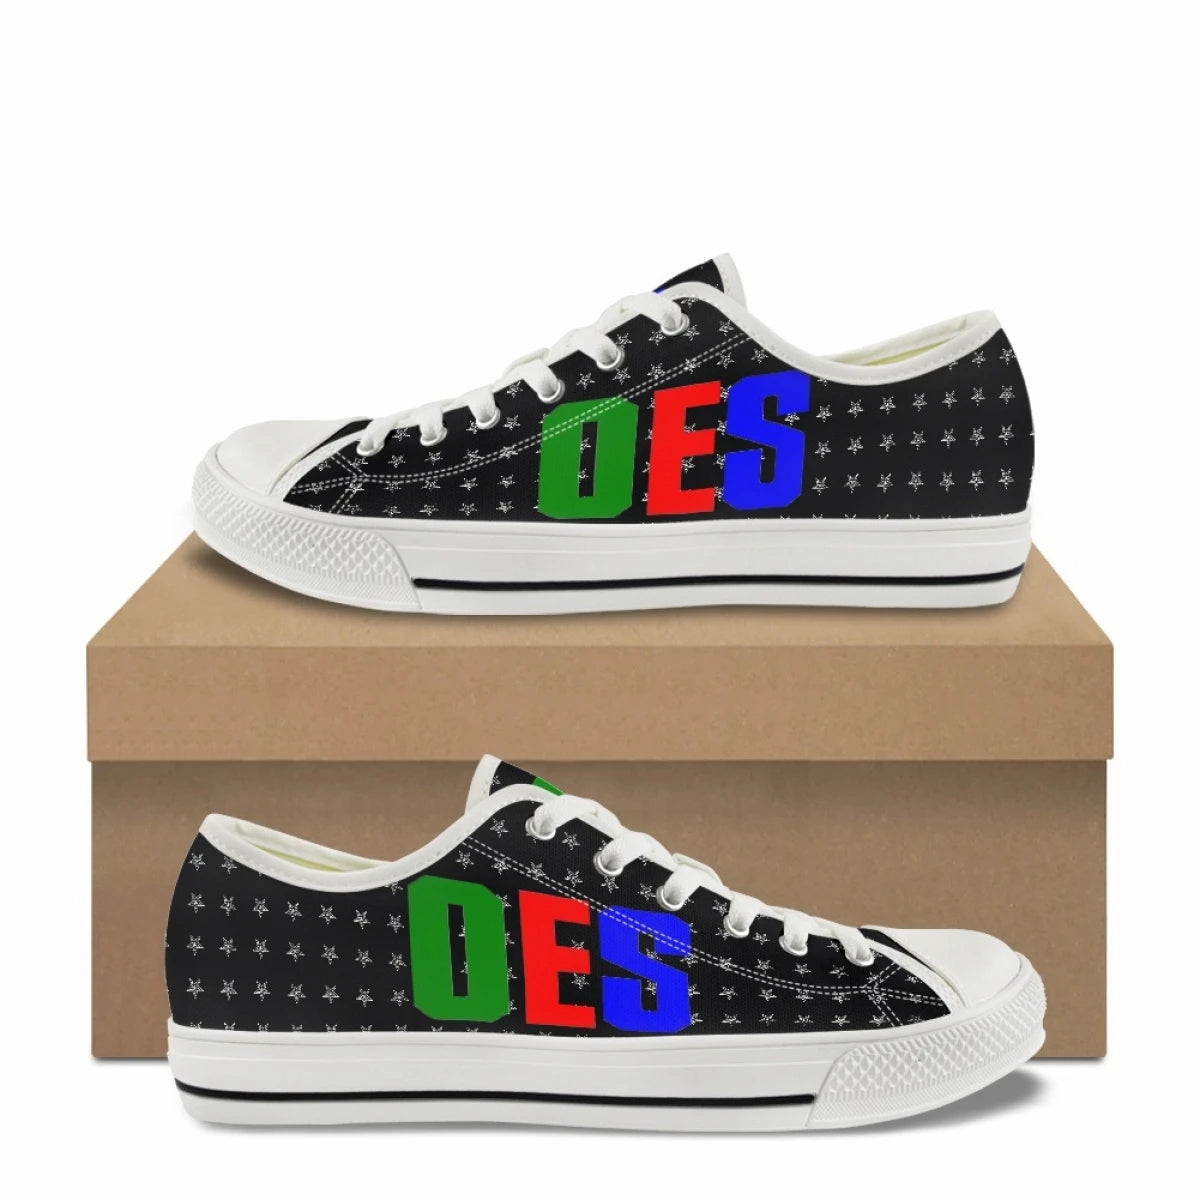 OES Sneakers - Black & White with OES Letters - Bricks Masons